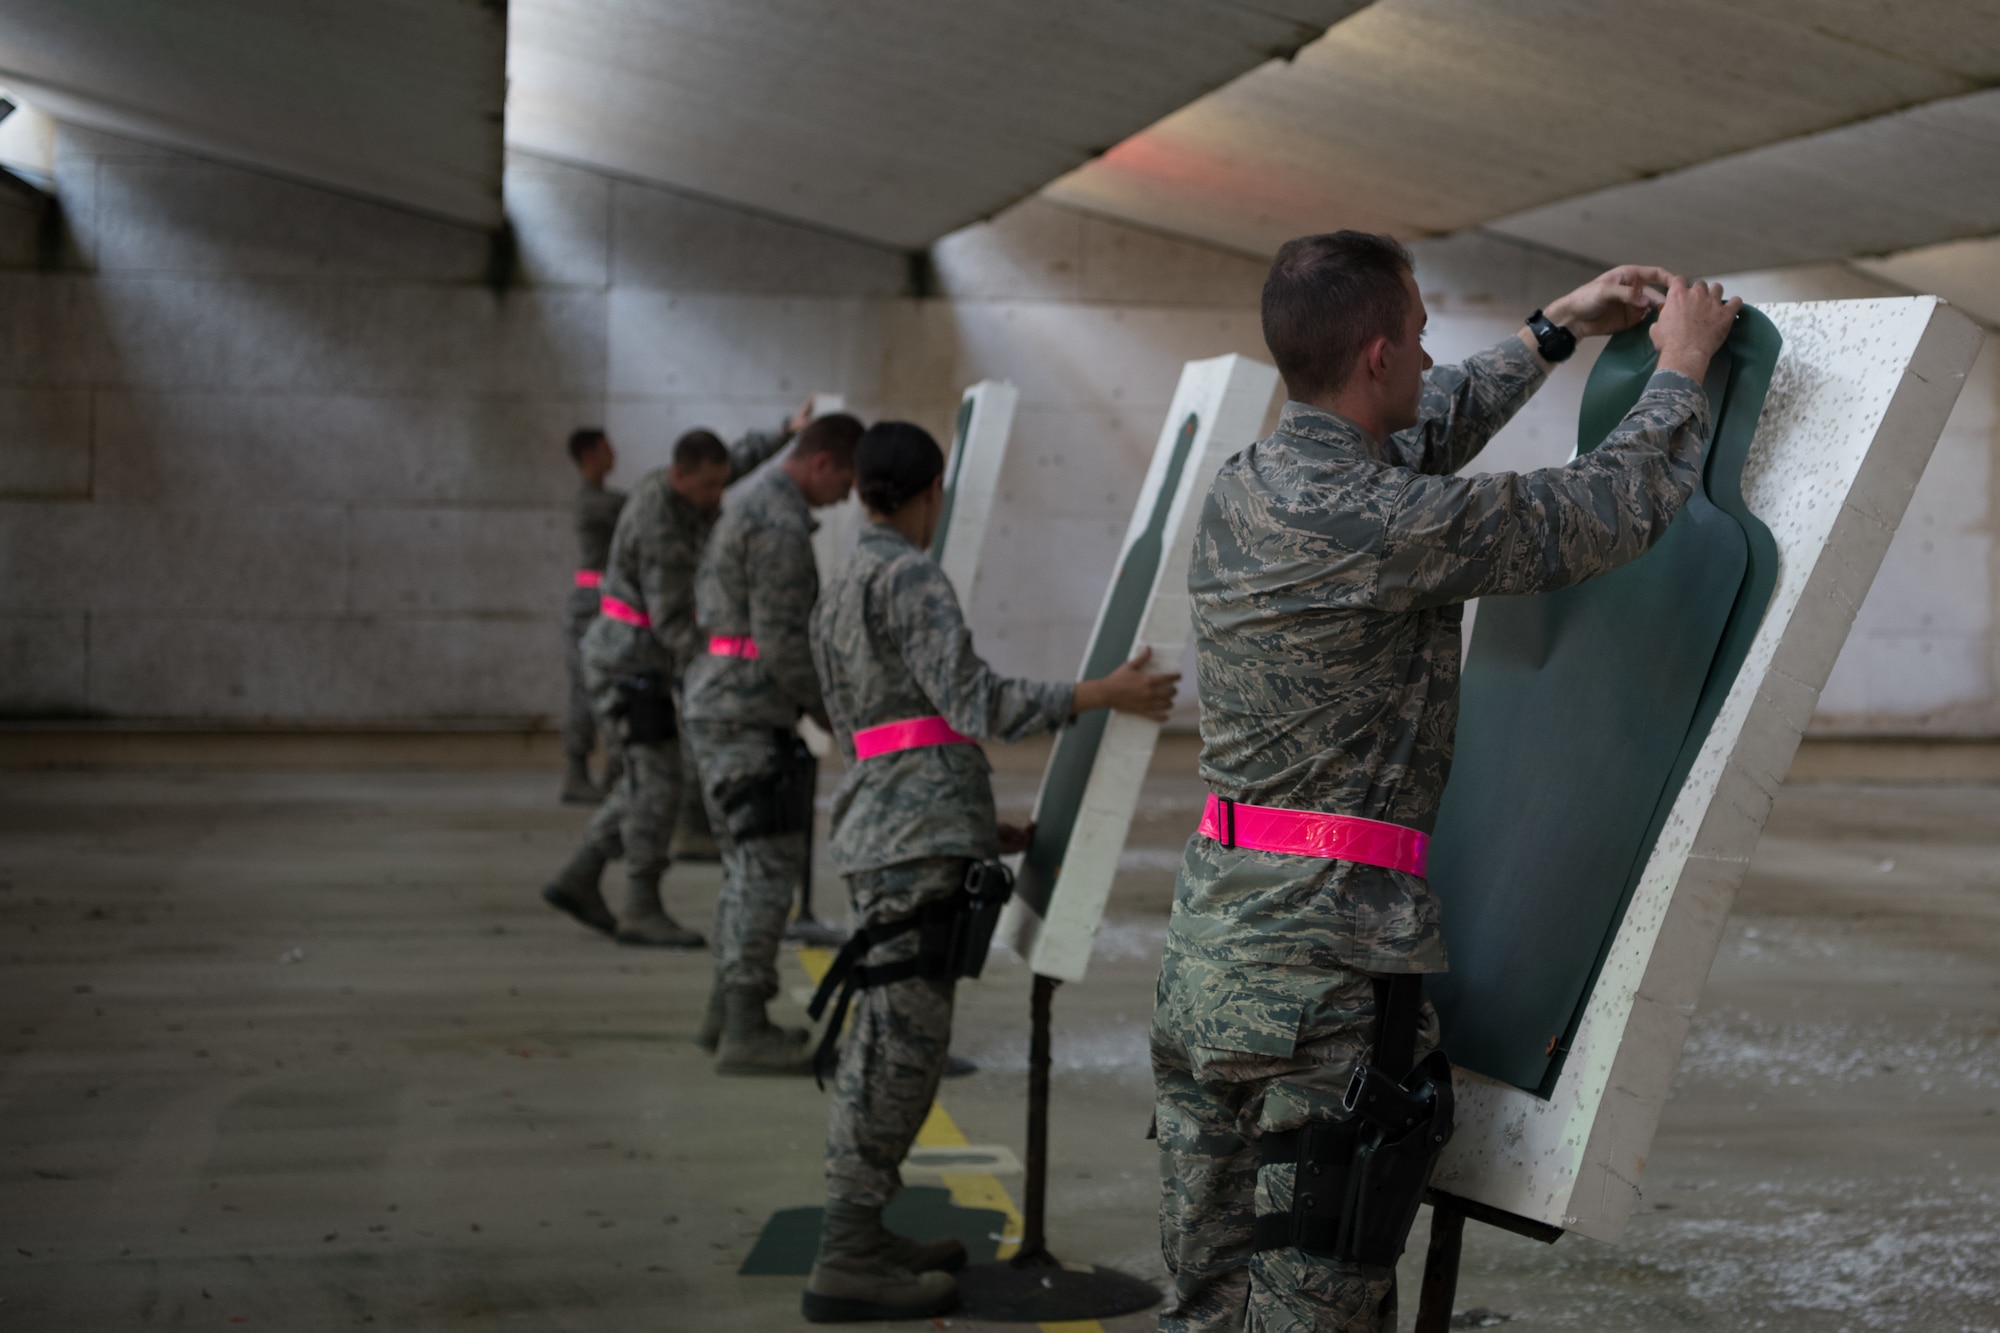 Air Force Reserve Officer Training Corps cadets retrieve their paper targets and replace them with new paper targets after completing their weapons qualification July 9, 2020, at the Combat Arms Training and Maintenance range on Maxwell Air Force Base, Alabama.